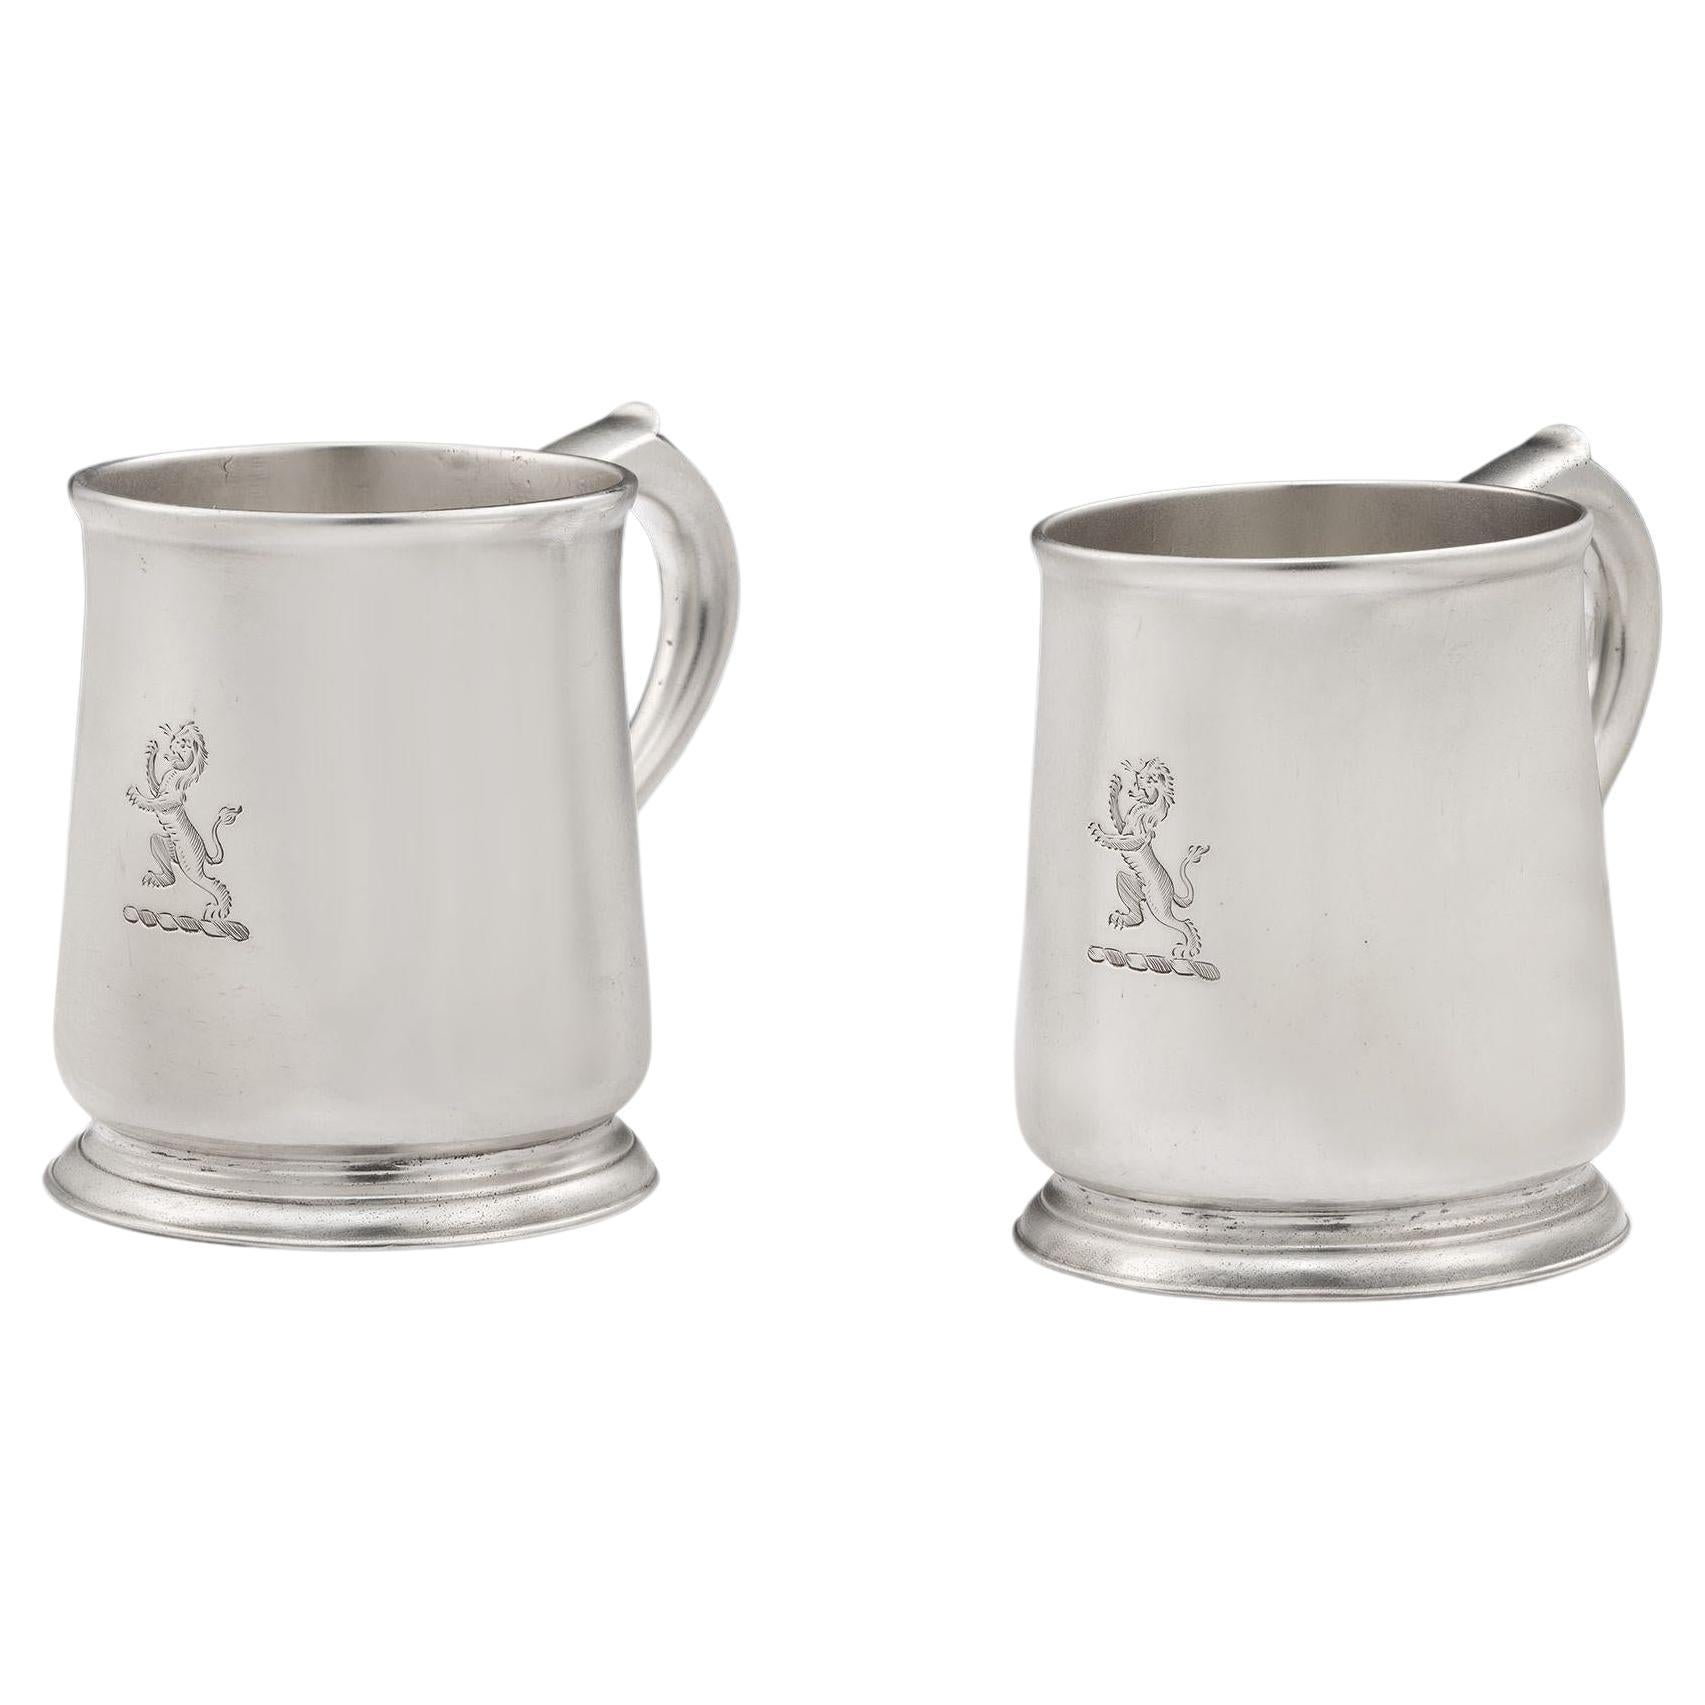 Pair of Early George III Mugs by Whipham & Wright, London, 1764.